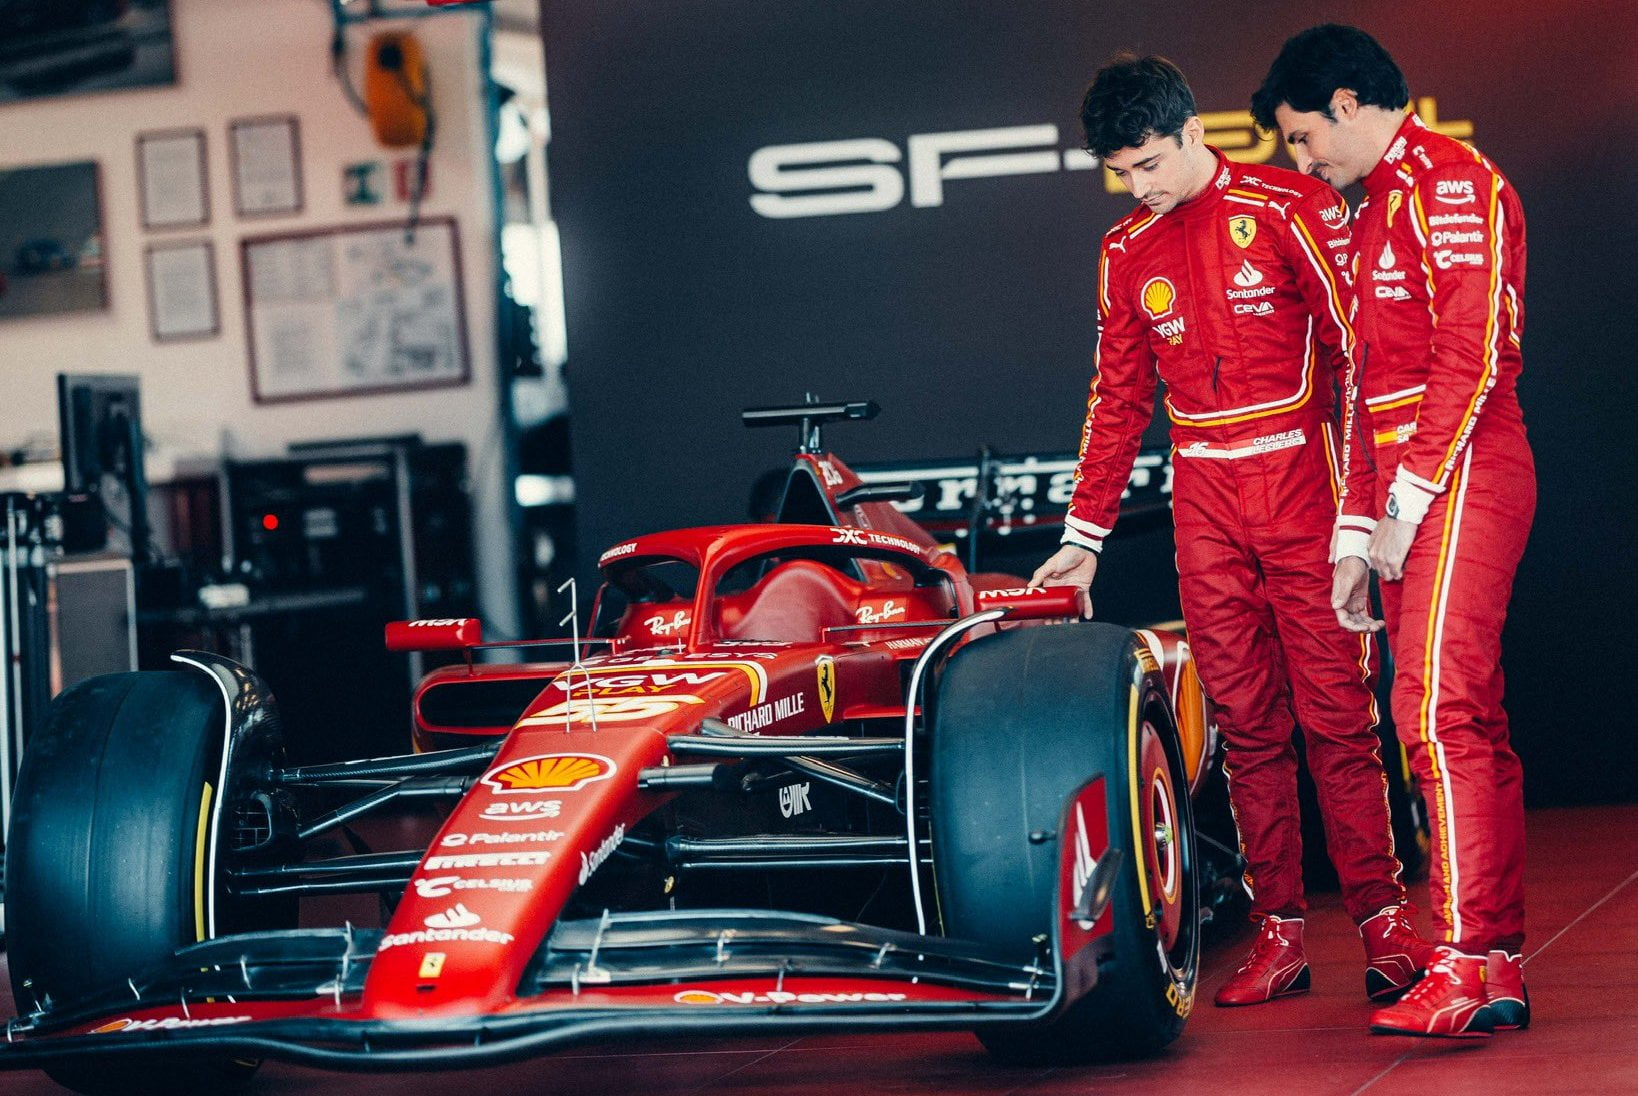 Ferrari’s SF-24: Balancing Qualifying Performance with Race Pace for Better Drivability